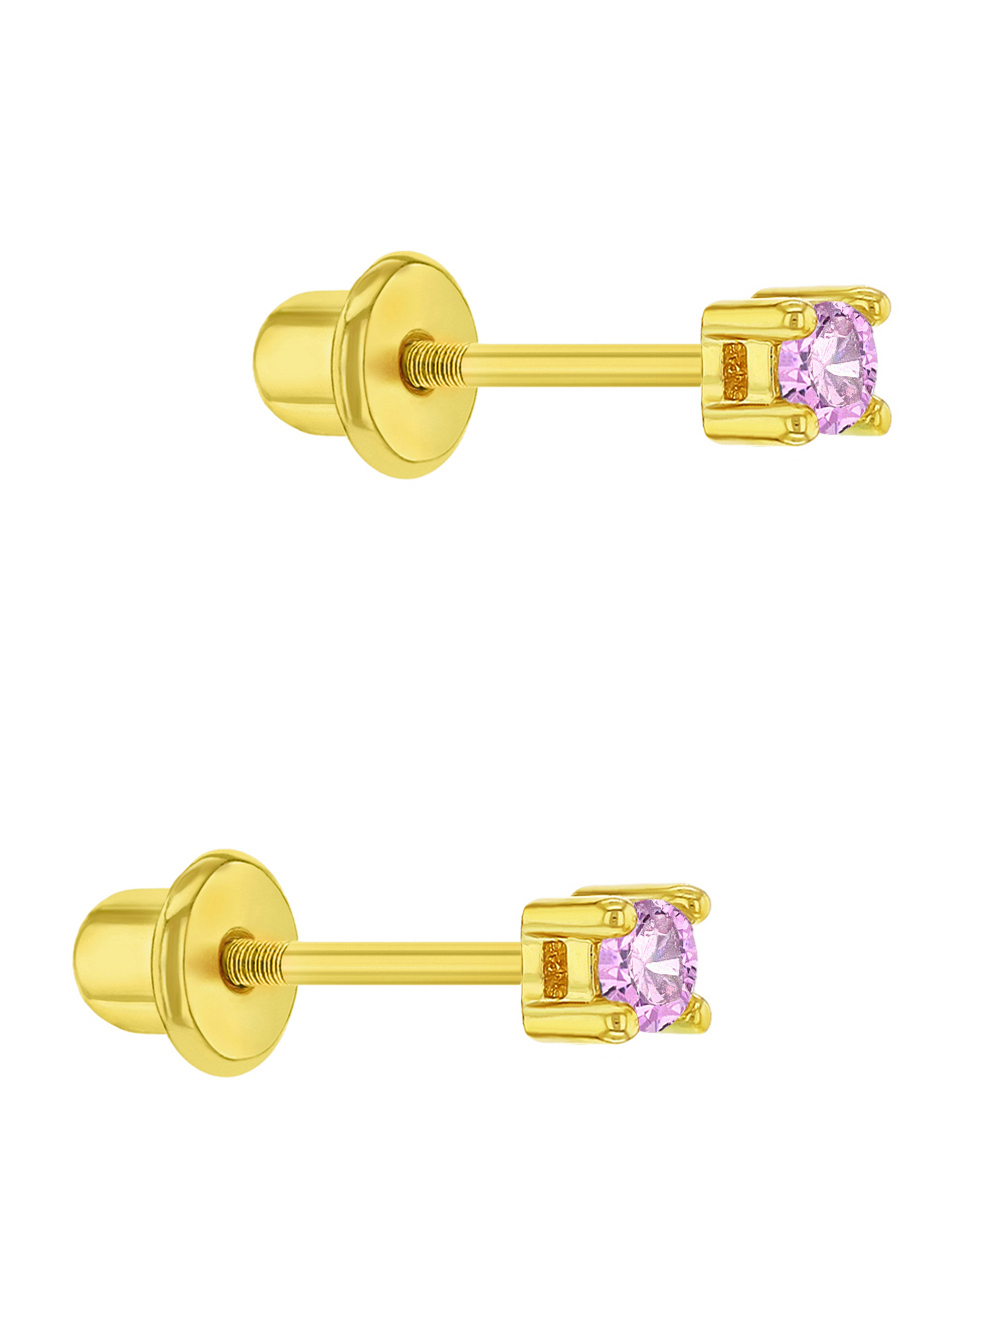 18K Gold Plated Tiny Crystal Screw Back Baby Earrings 2mm, Size: Newborn & Infants